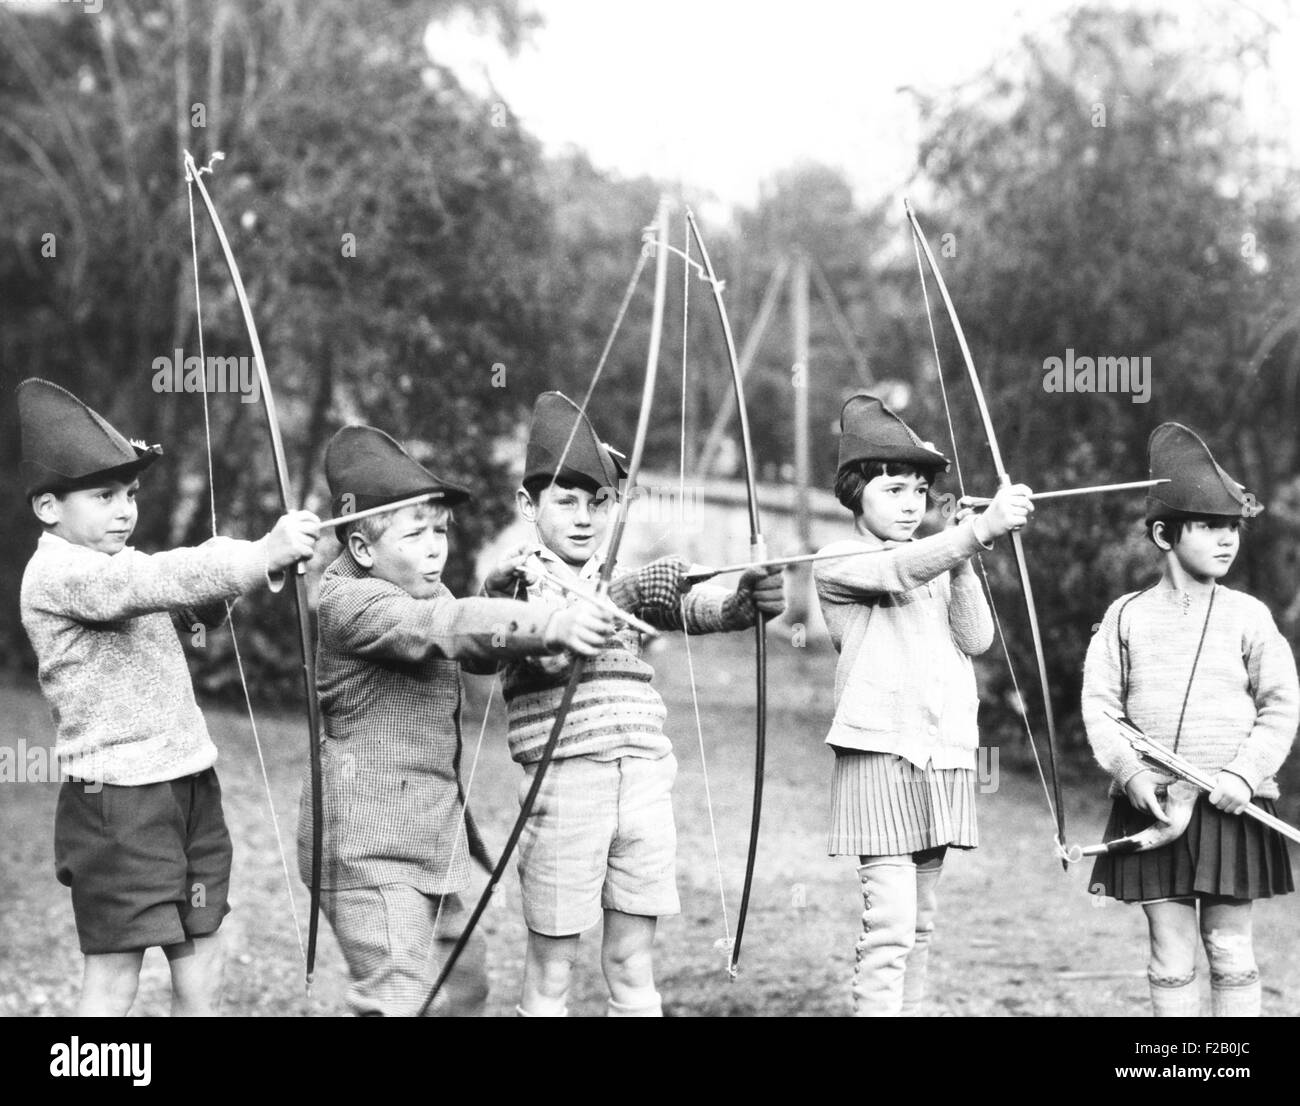 Britain's Prince Philip, (2nd from left) at an American school at St. Cloud, France. Ca. 1931. In an archery class, L-R: Jacques de Bourbon; Phillip; Teddy Culbert; Martha Robinson; and Princess Anne of Bourbon-Parma (now the wife of Prince Michael of Romania). The Prince attended the school for three years. The above photo was brought to New York by Prof. Donald R. MacJannet on the SS Constitution February 8, 1952. (CSU 2015 9 1081) Stock Photo